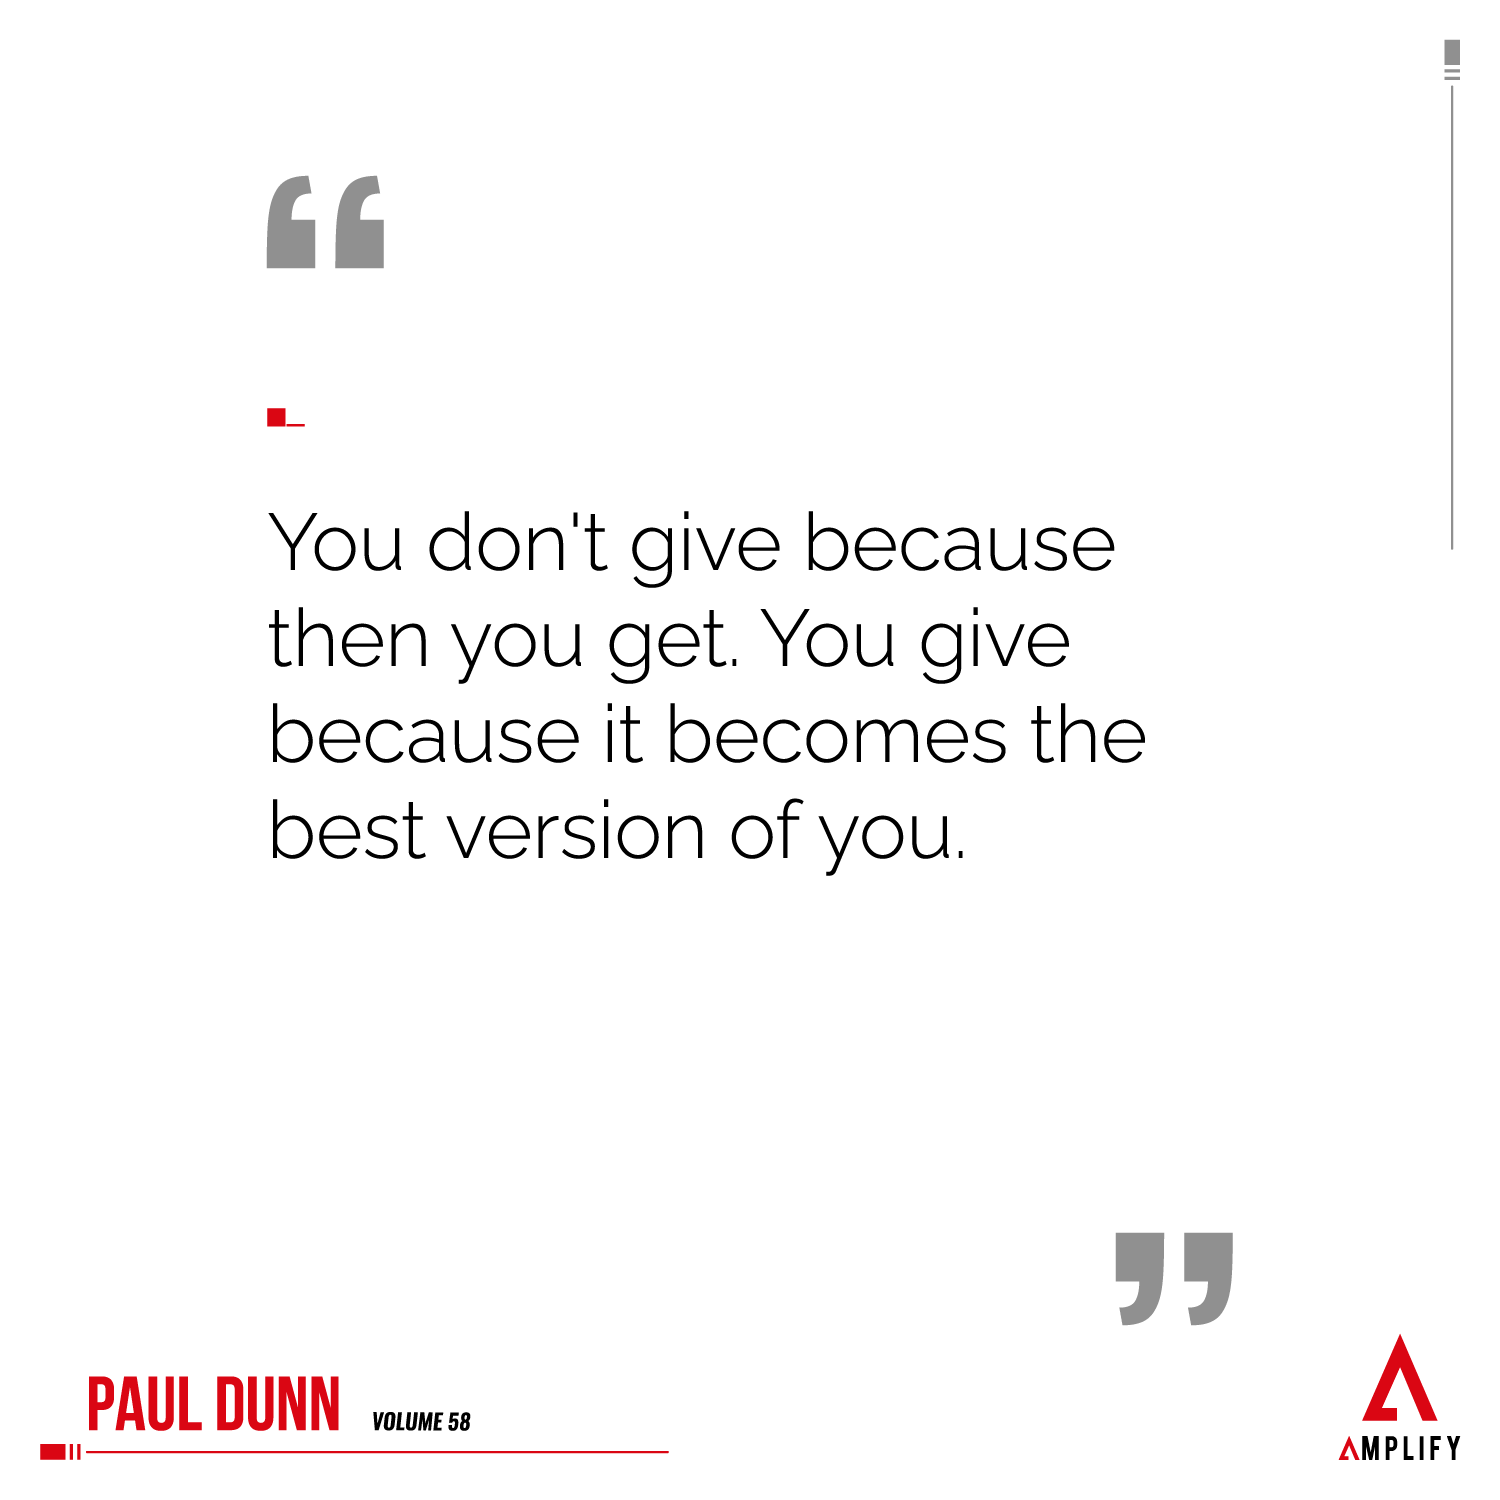 Quote: You don't give because then you get. You give because it becomes the best version of you.